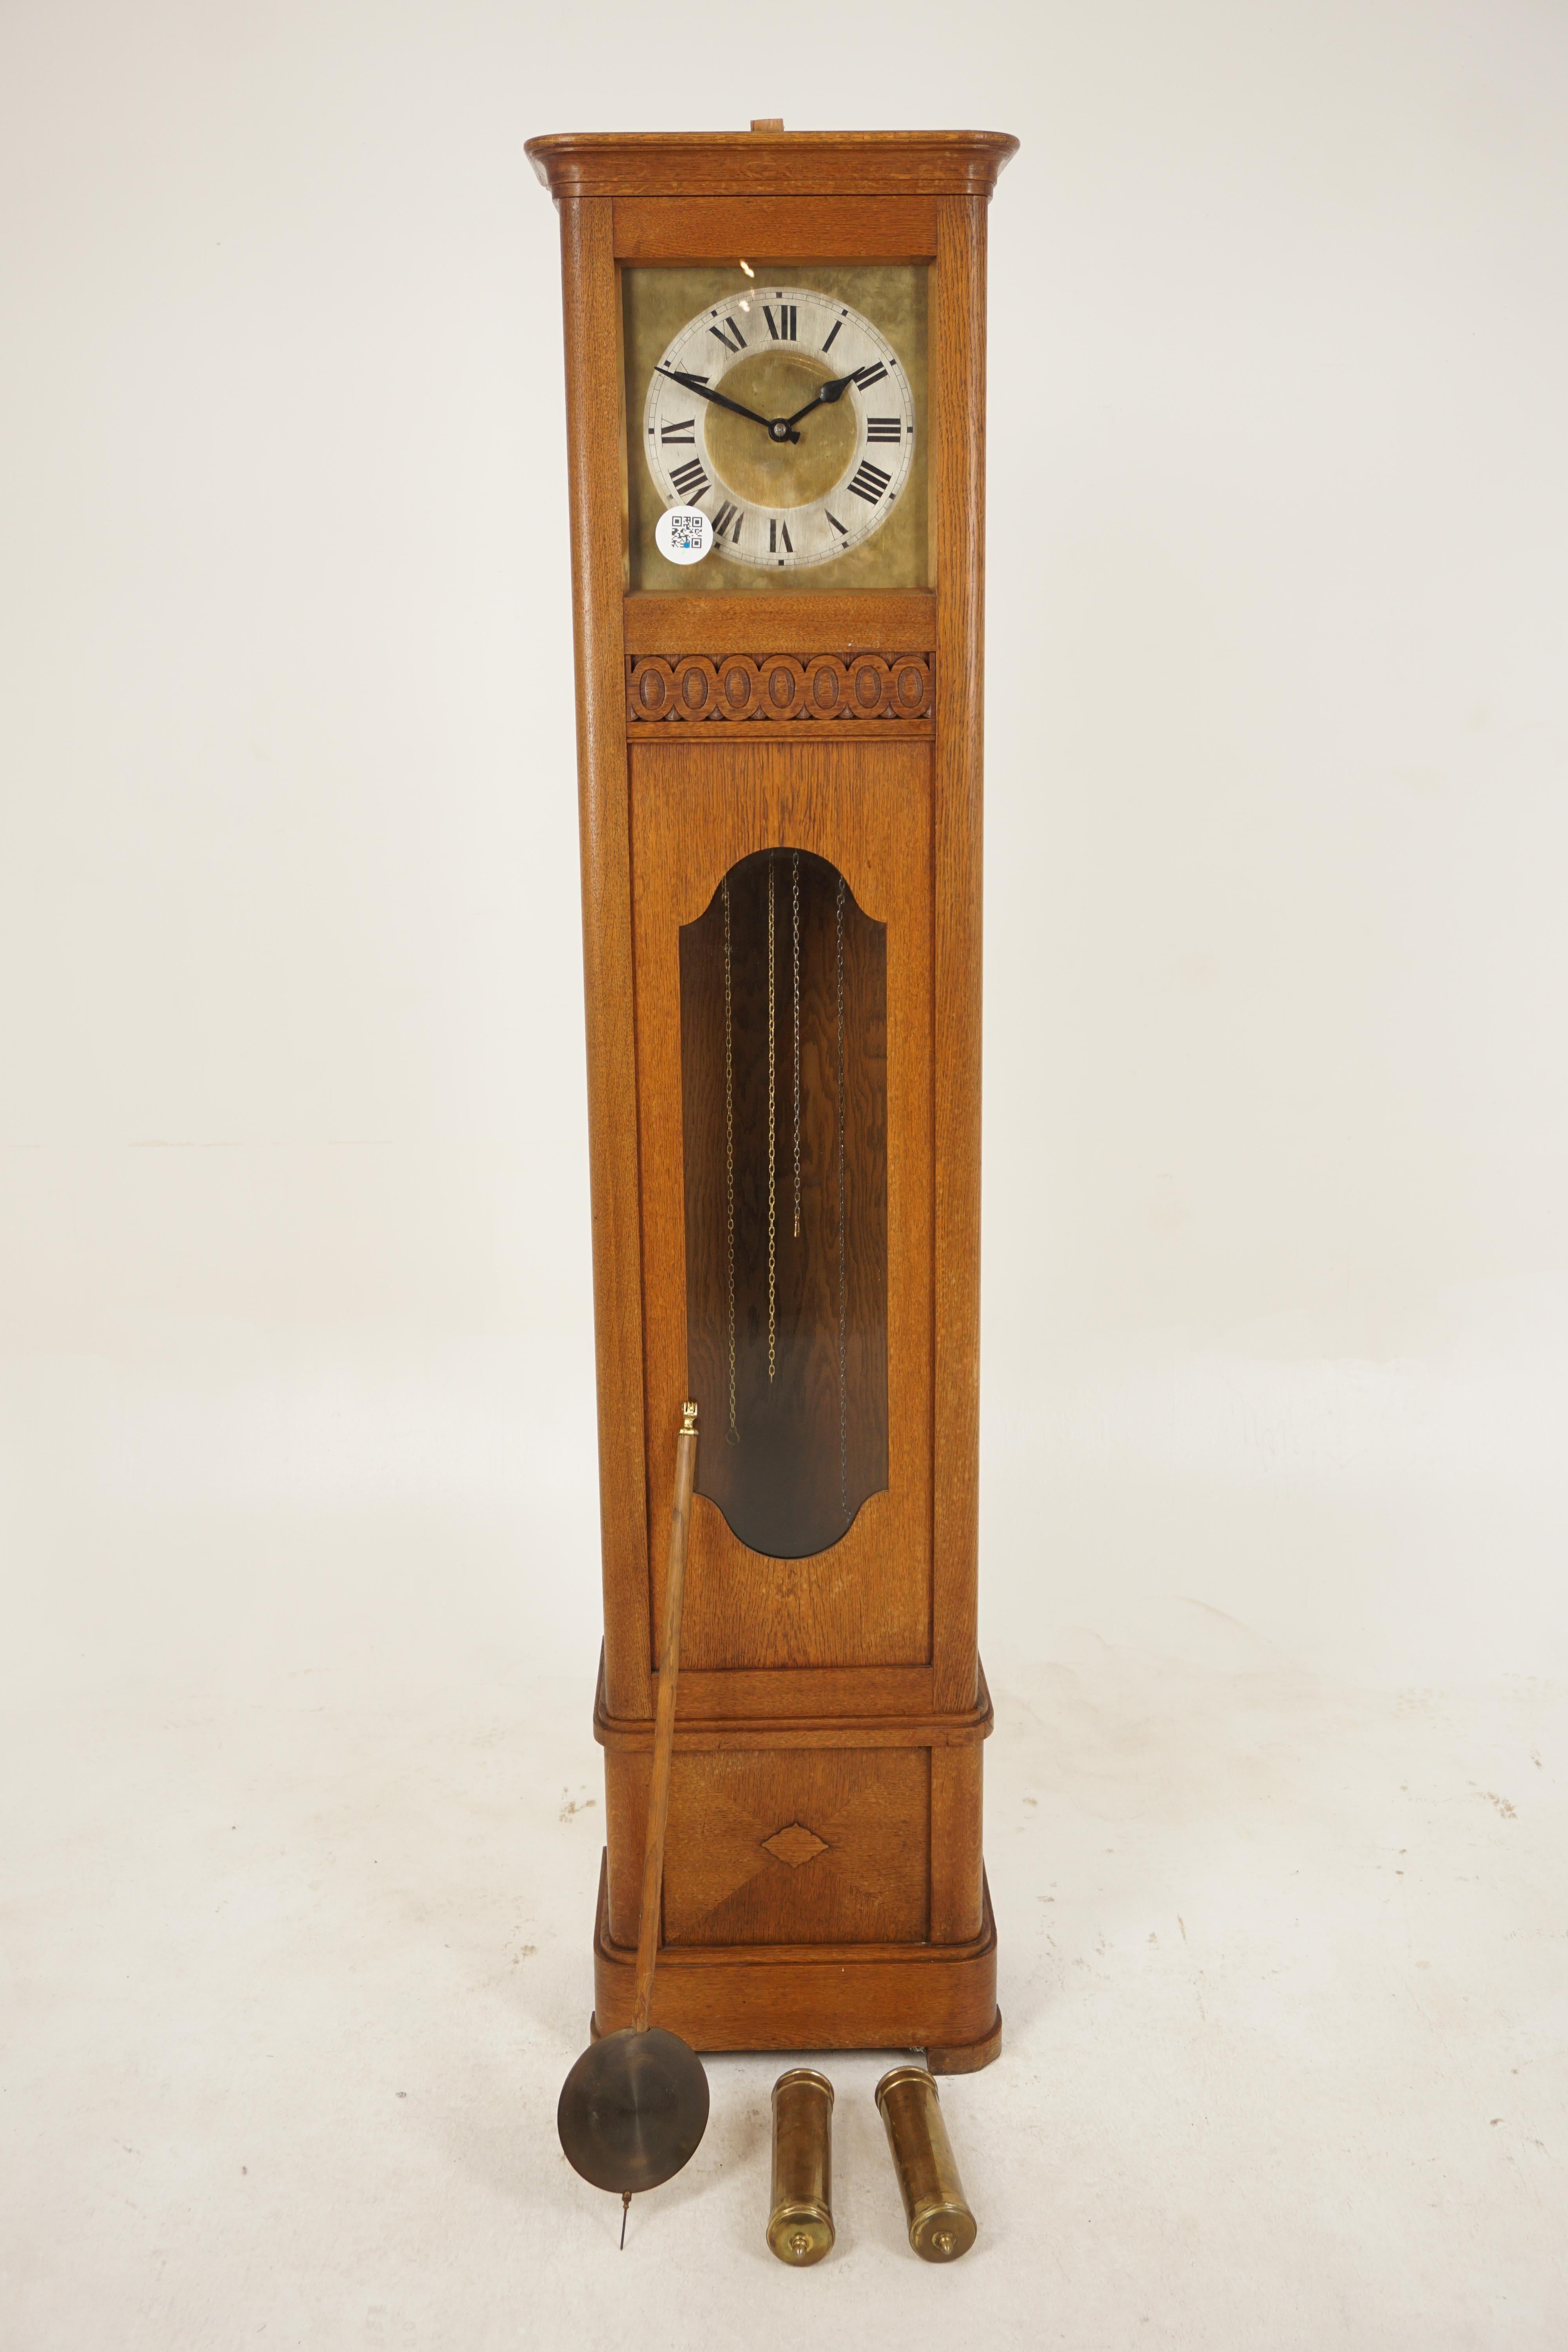 Vintage Art Deco Oak Grandfather clock, long case clock, Scotland 1930, H131

Scotland 1930
Solid Oak
Original Finish
On eight day striking movement 
Carved oak case
Silver and brass dial with roman numerals
Glass front door opens to reveal a pair